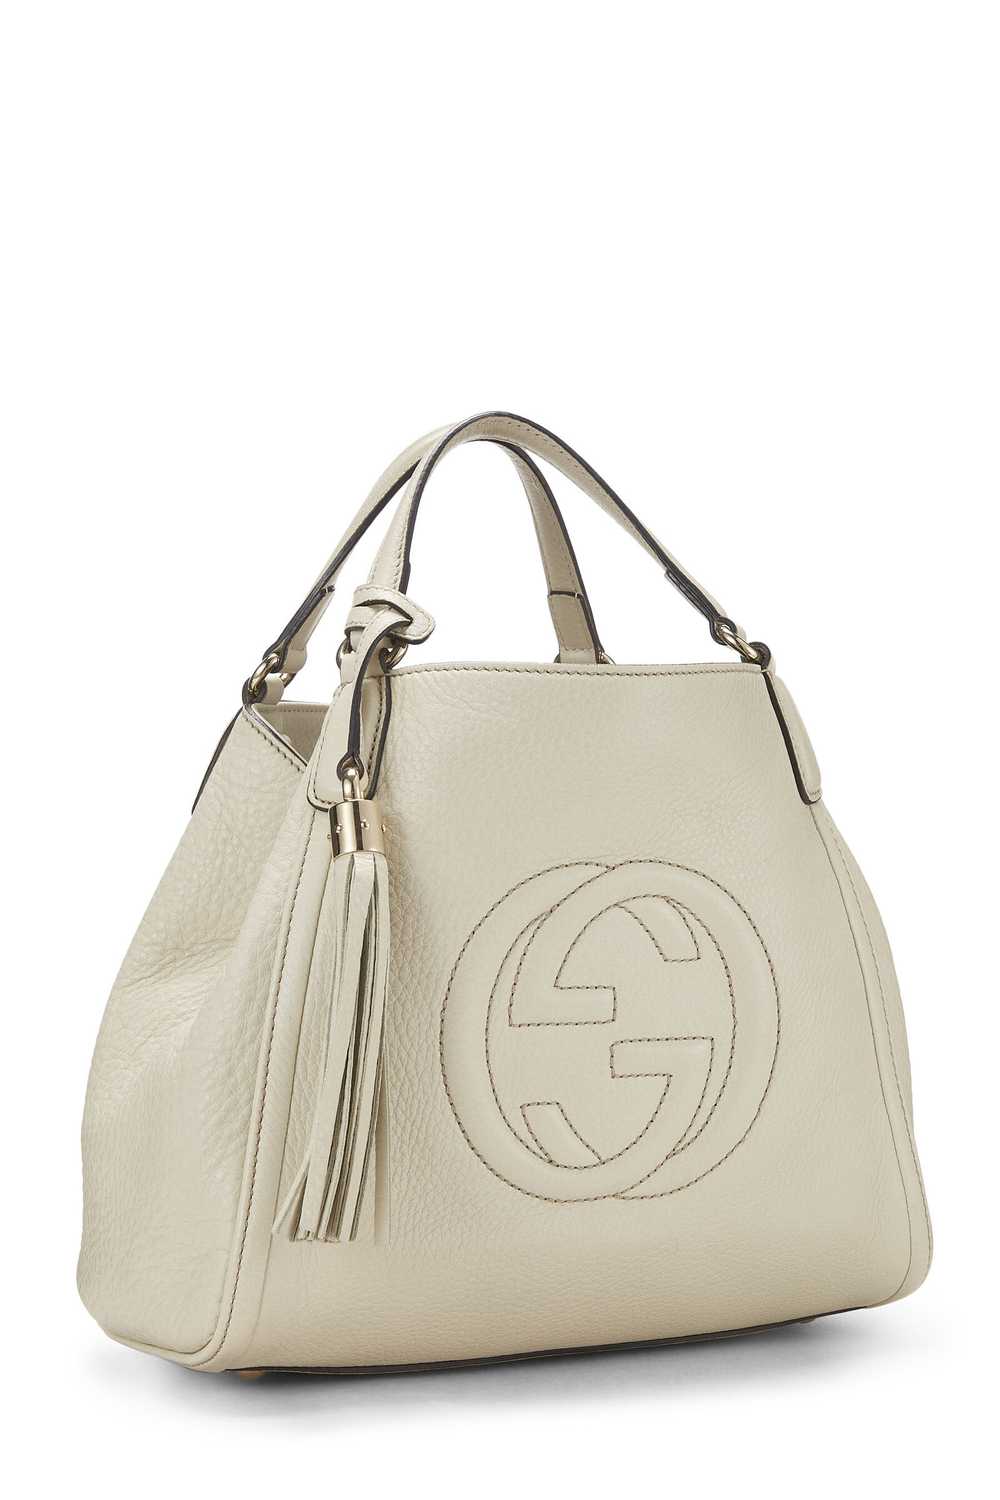 White Leather Soho Convertible Shoulder Bag Small - image 2